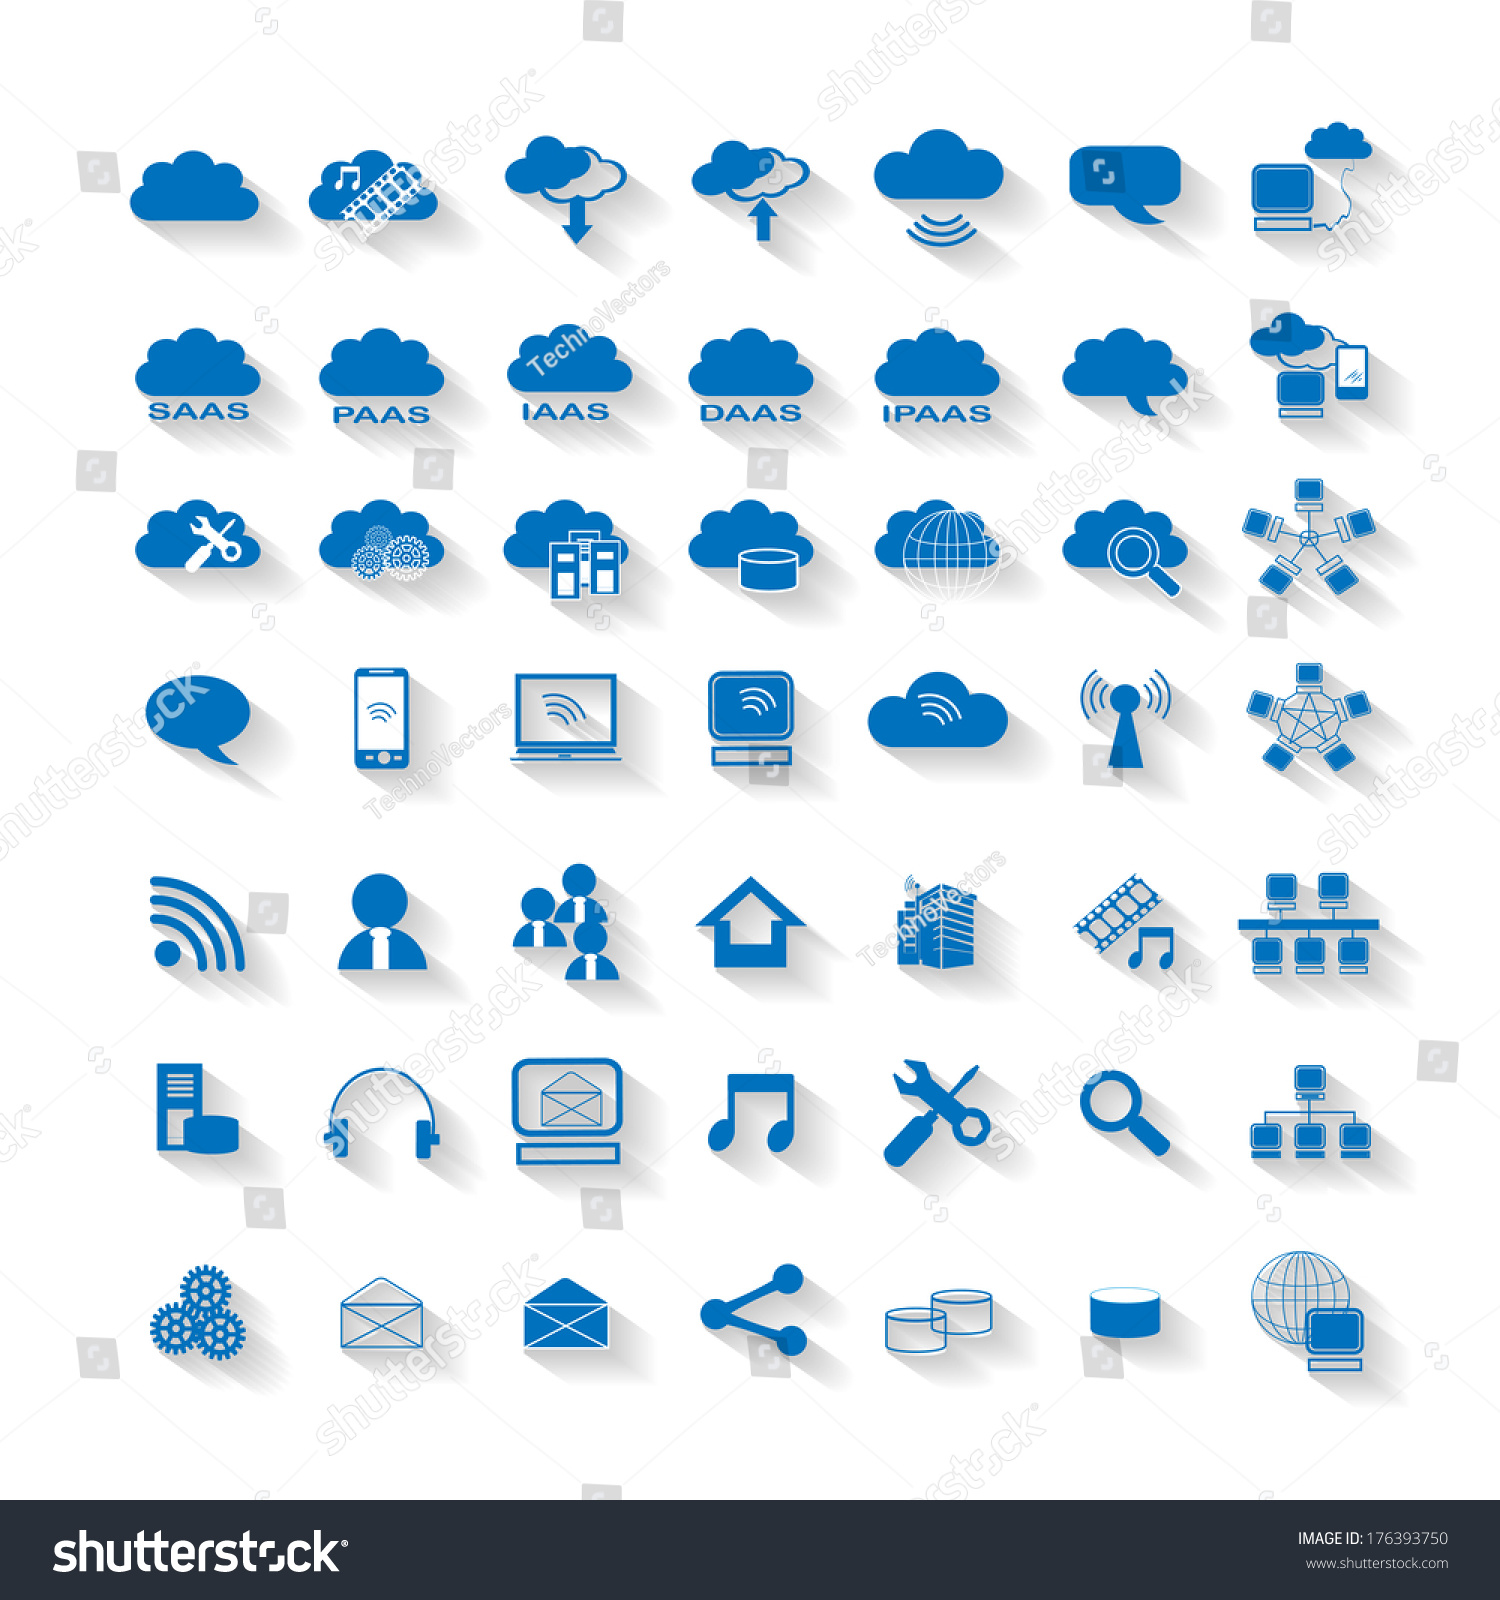 Cloud Computing Network Web Icon Collections Stock Vector Royalty Free